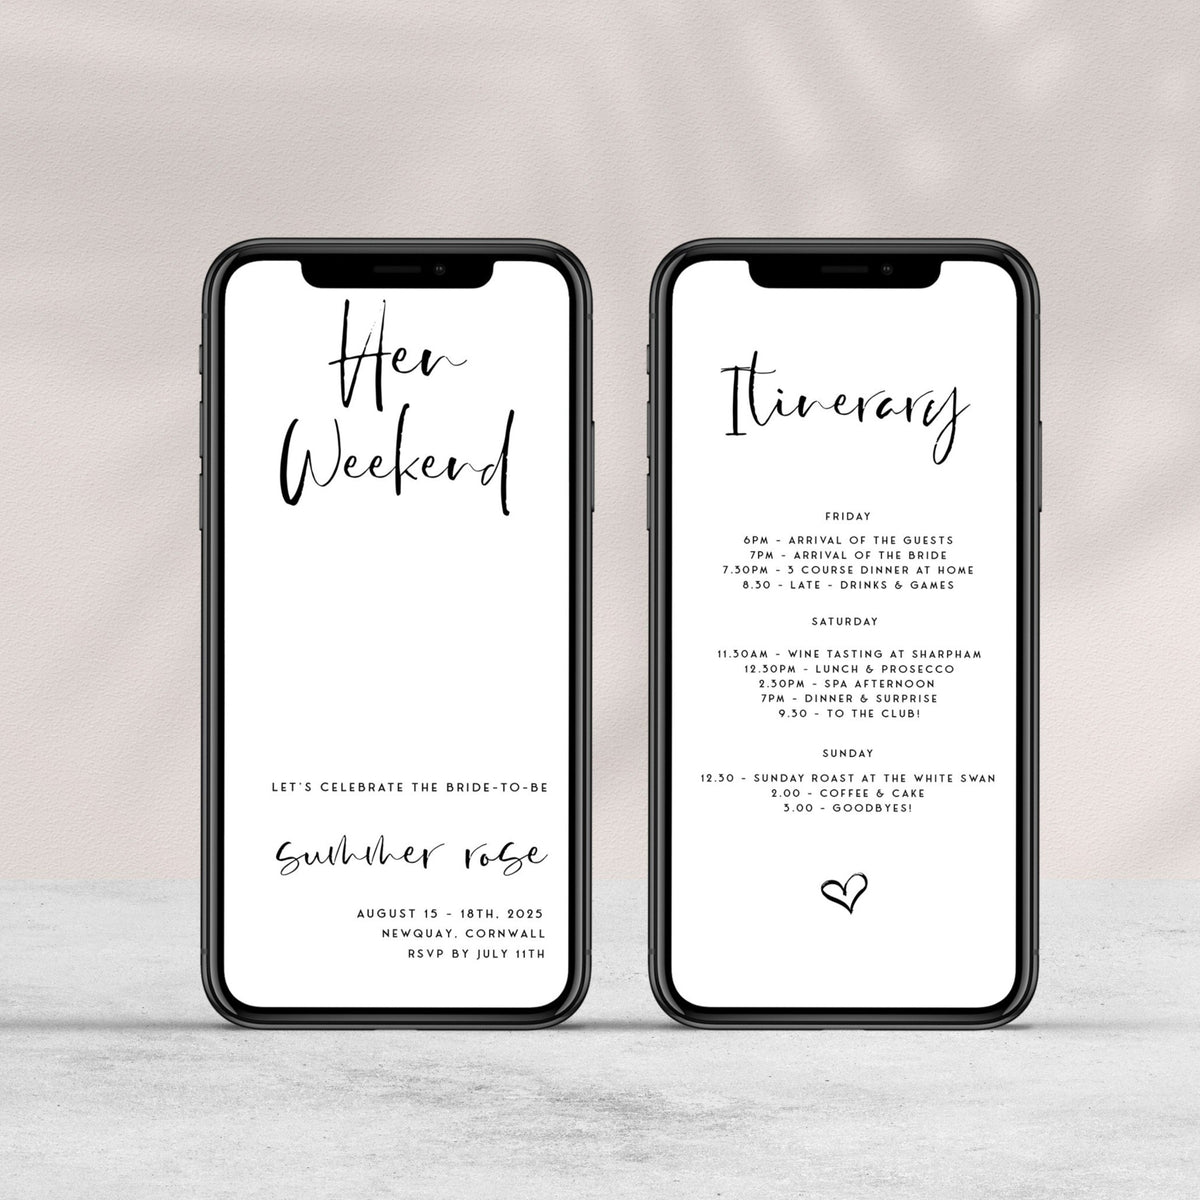 Fully editable hen weekend mobile invitation with a modern minimalist design. Perfect for a modern simple bridal shower themed party